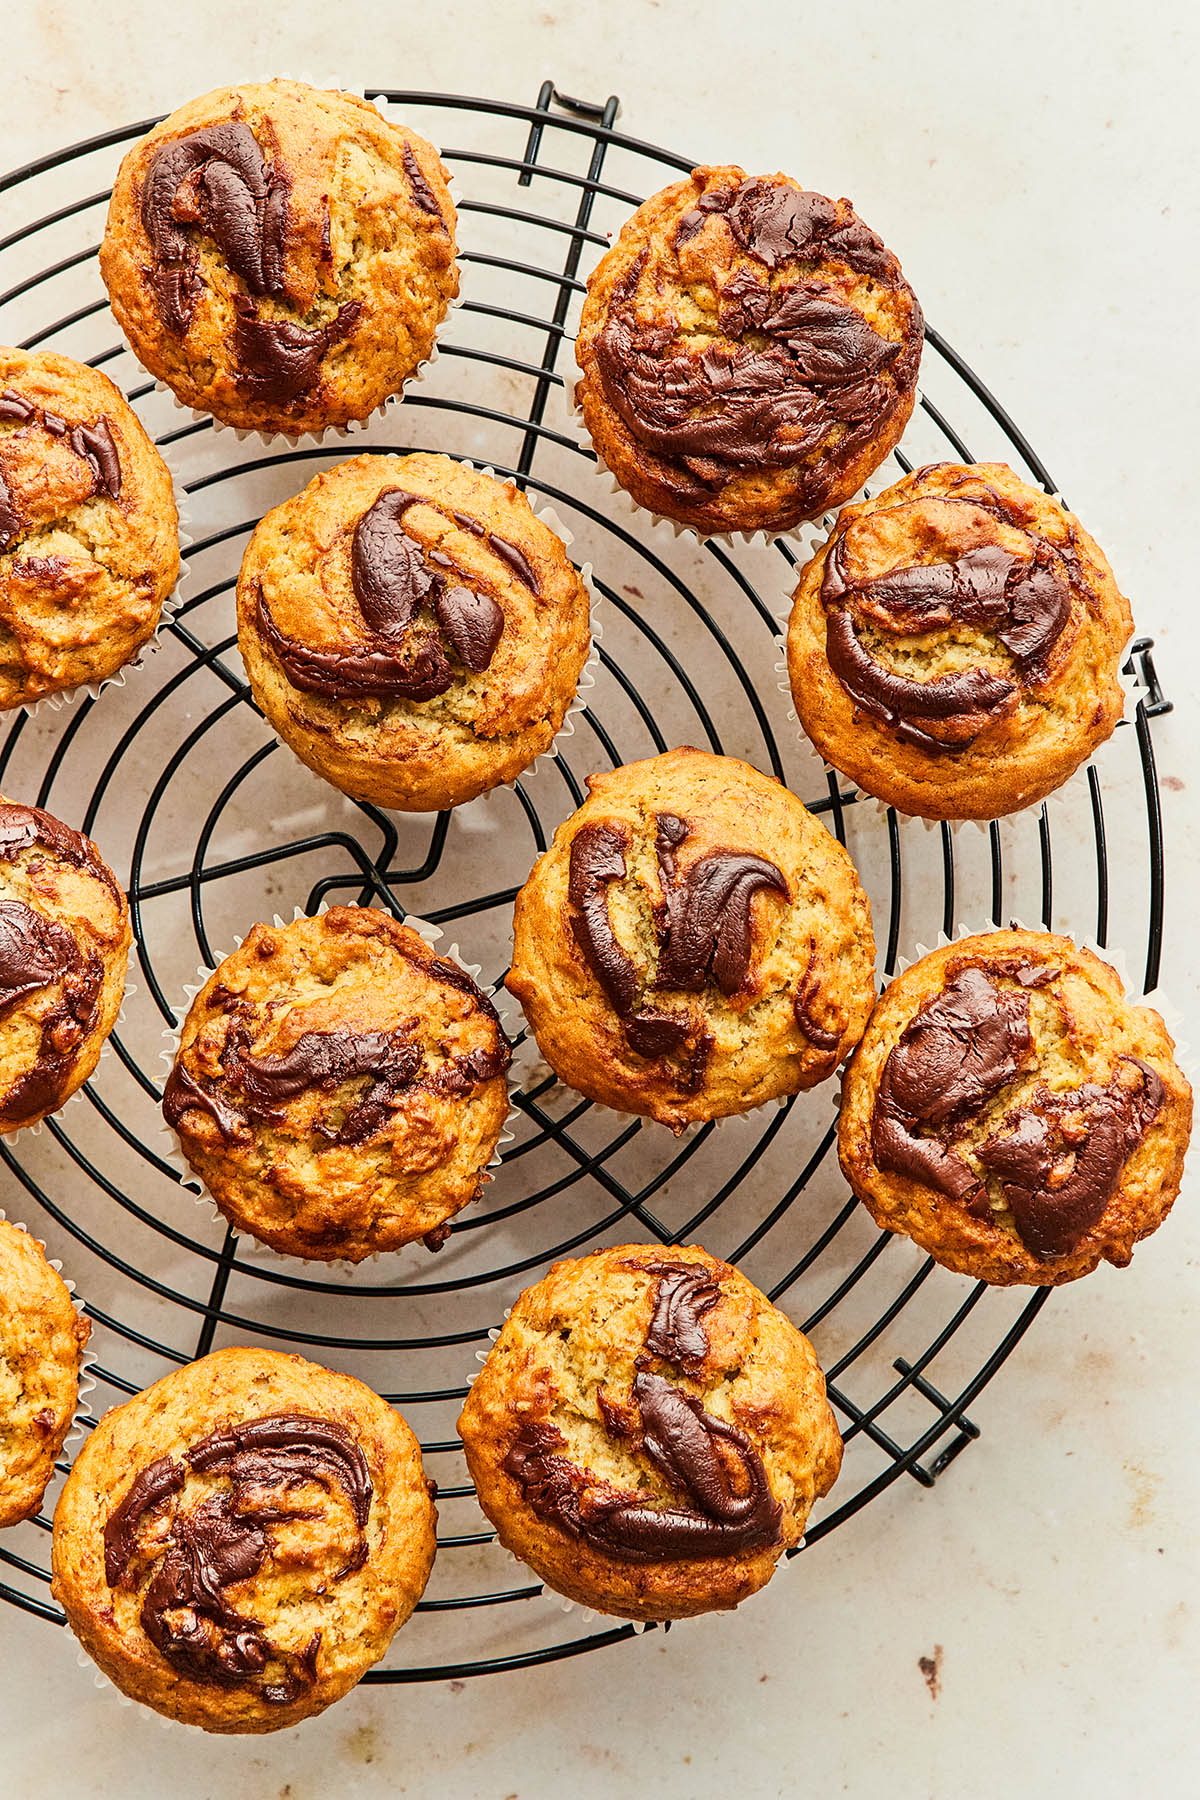 Banana Nutella muffins on a round black wire cooling rack.